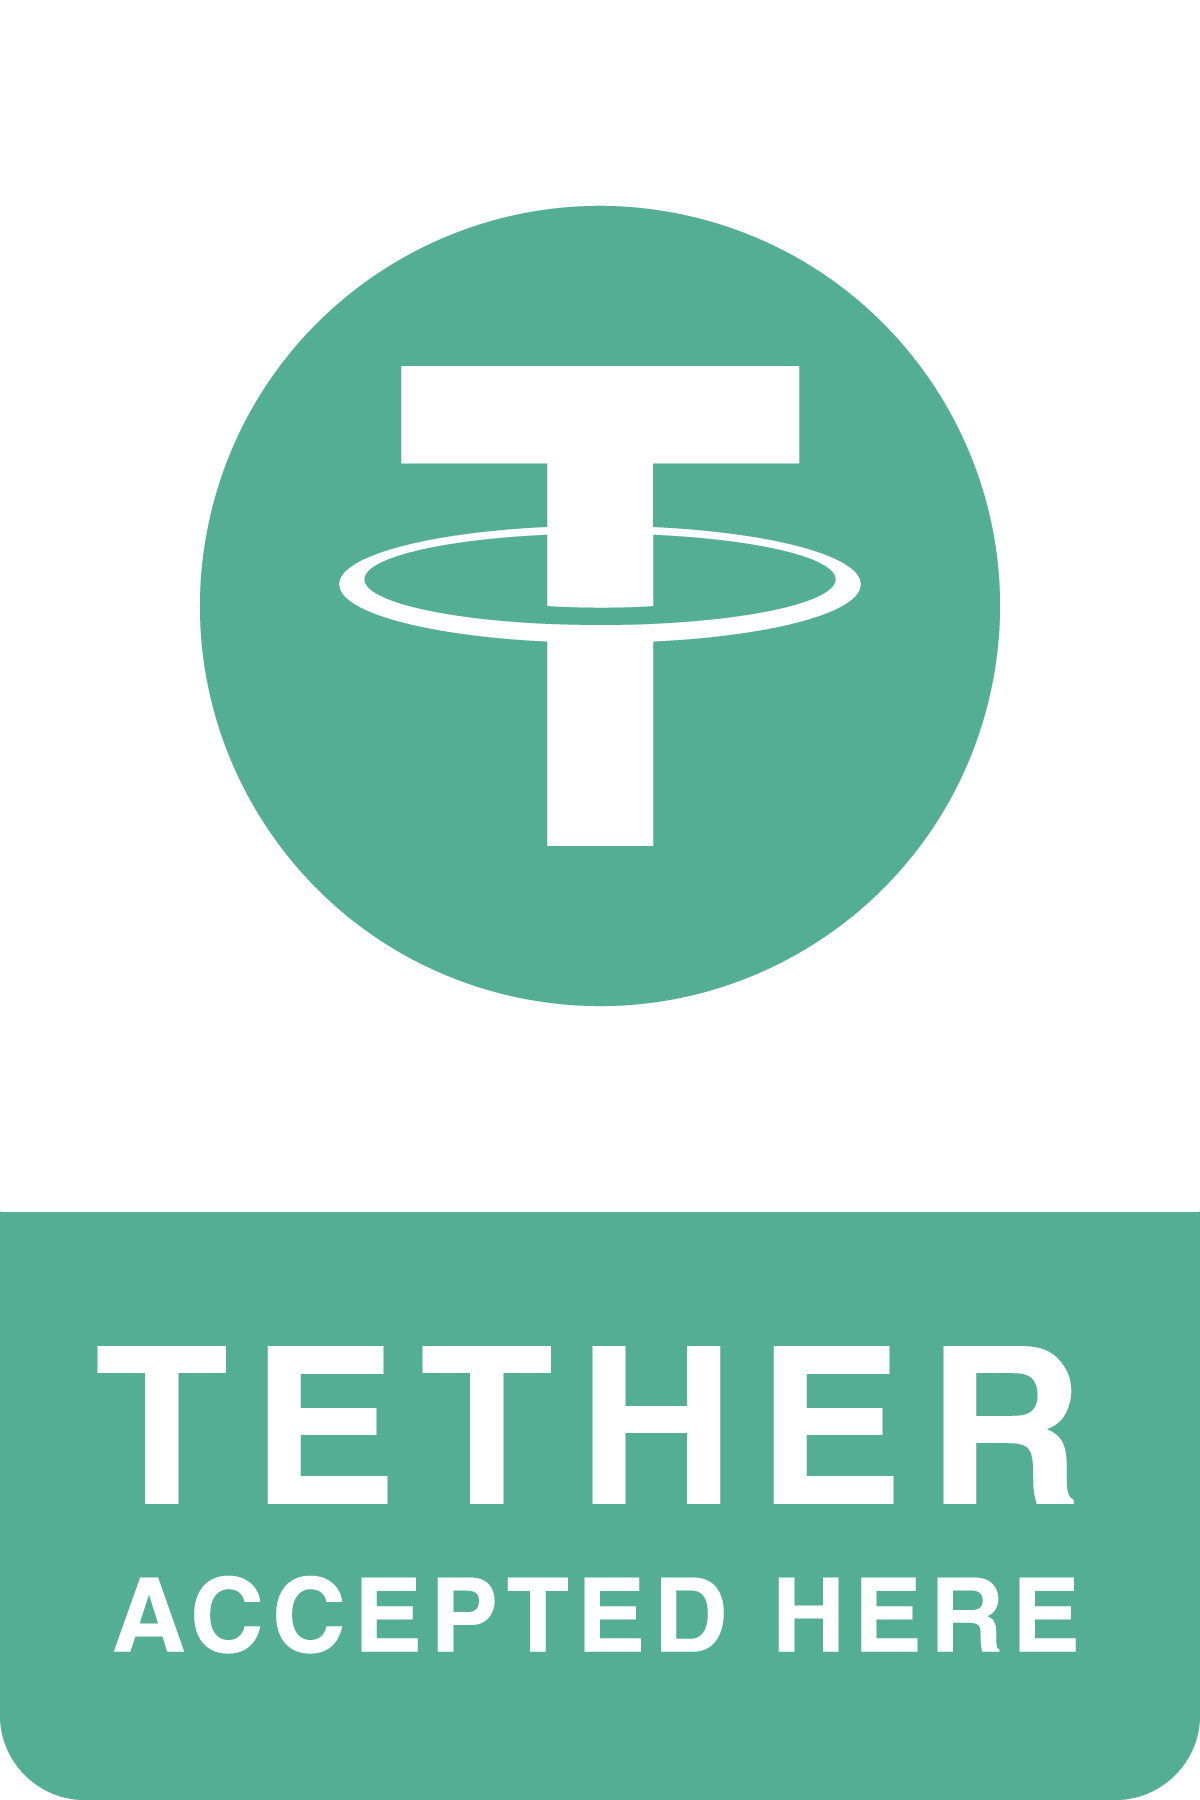 We accept Tether